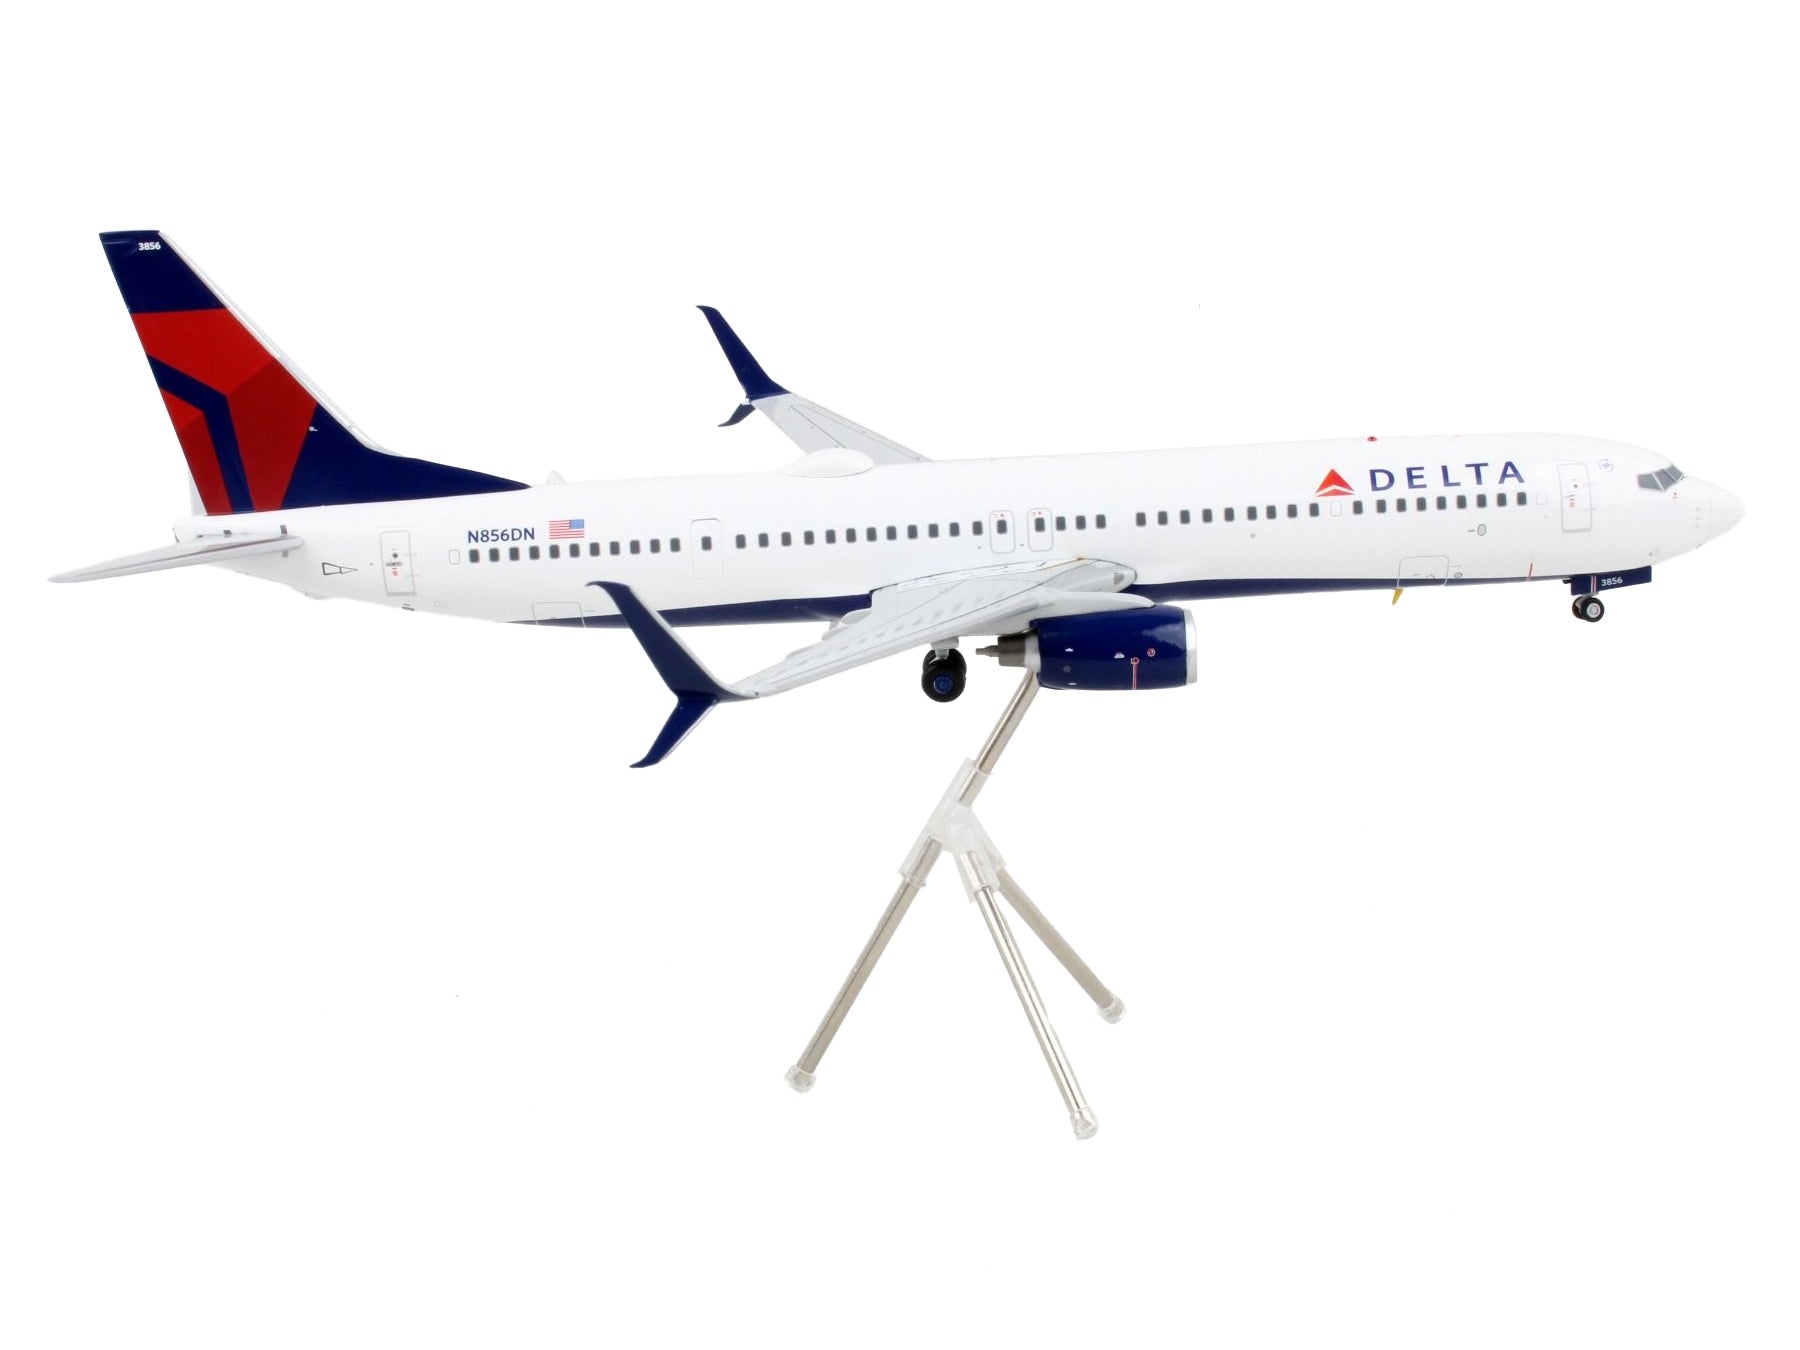 Boeing 737-900ER Commercial Aircraft "Delta Air Lines" White with Blue and Red Tail "Gemini 200" Series 1/200 Diecast Model Airplane by GeminiJets